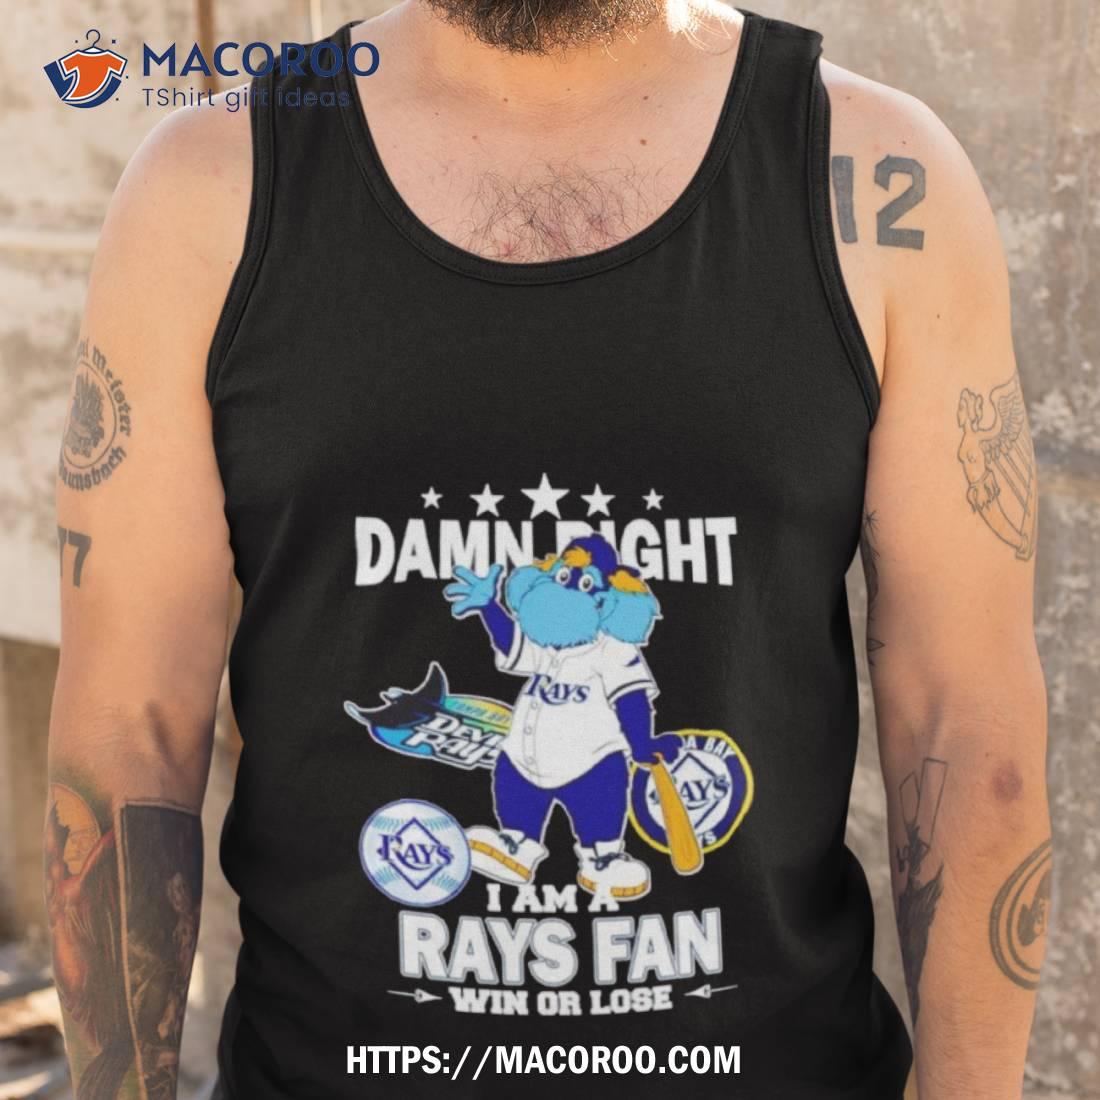 Tampa Bay Rays Mascot Damn Right I Am A Rays Fan Win Or Lose T Shirt